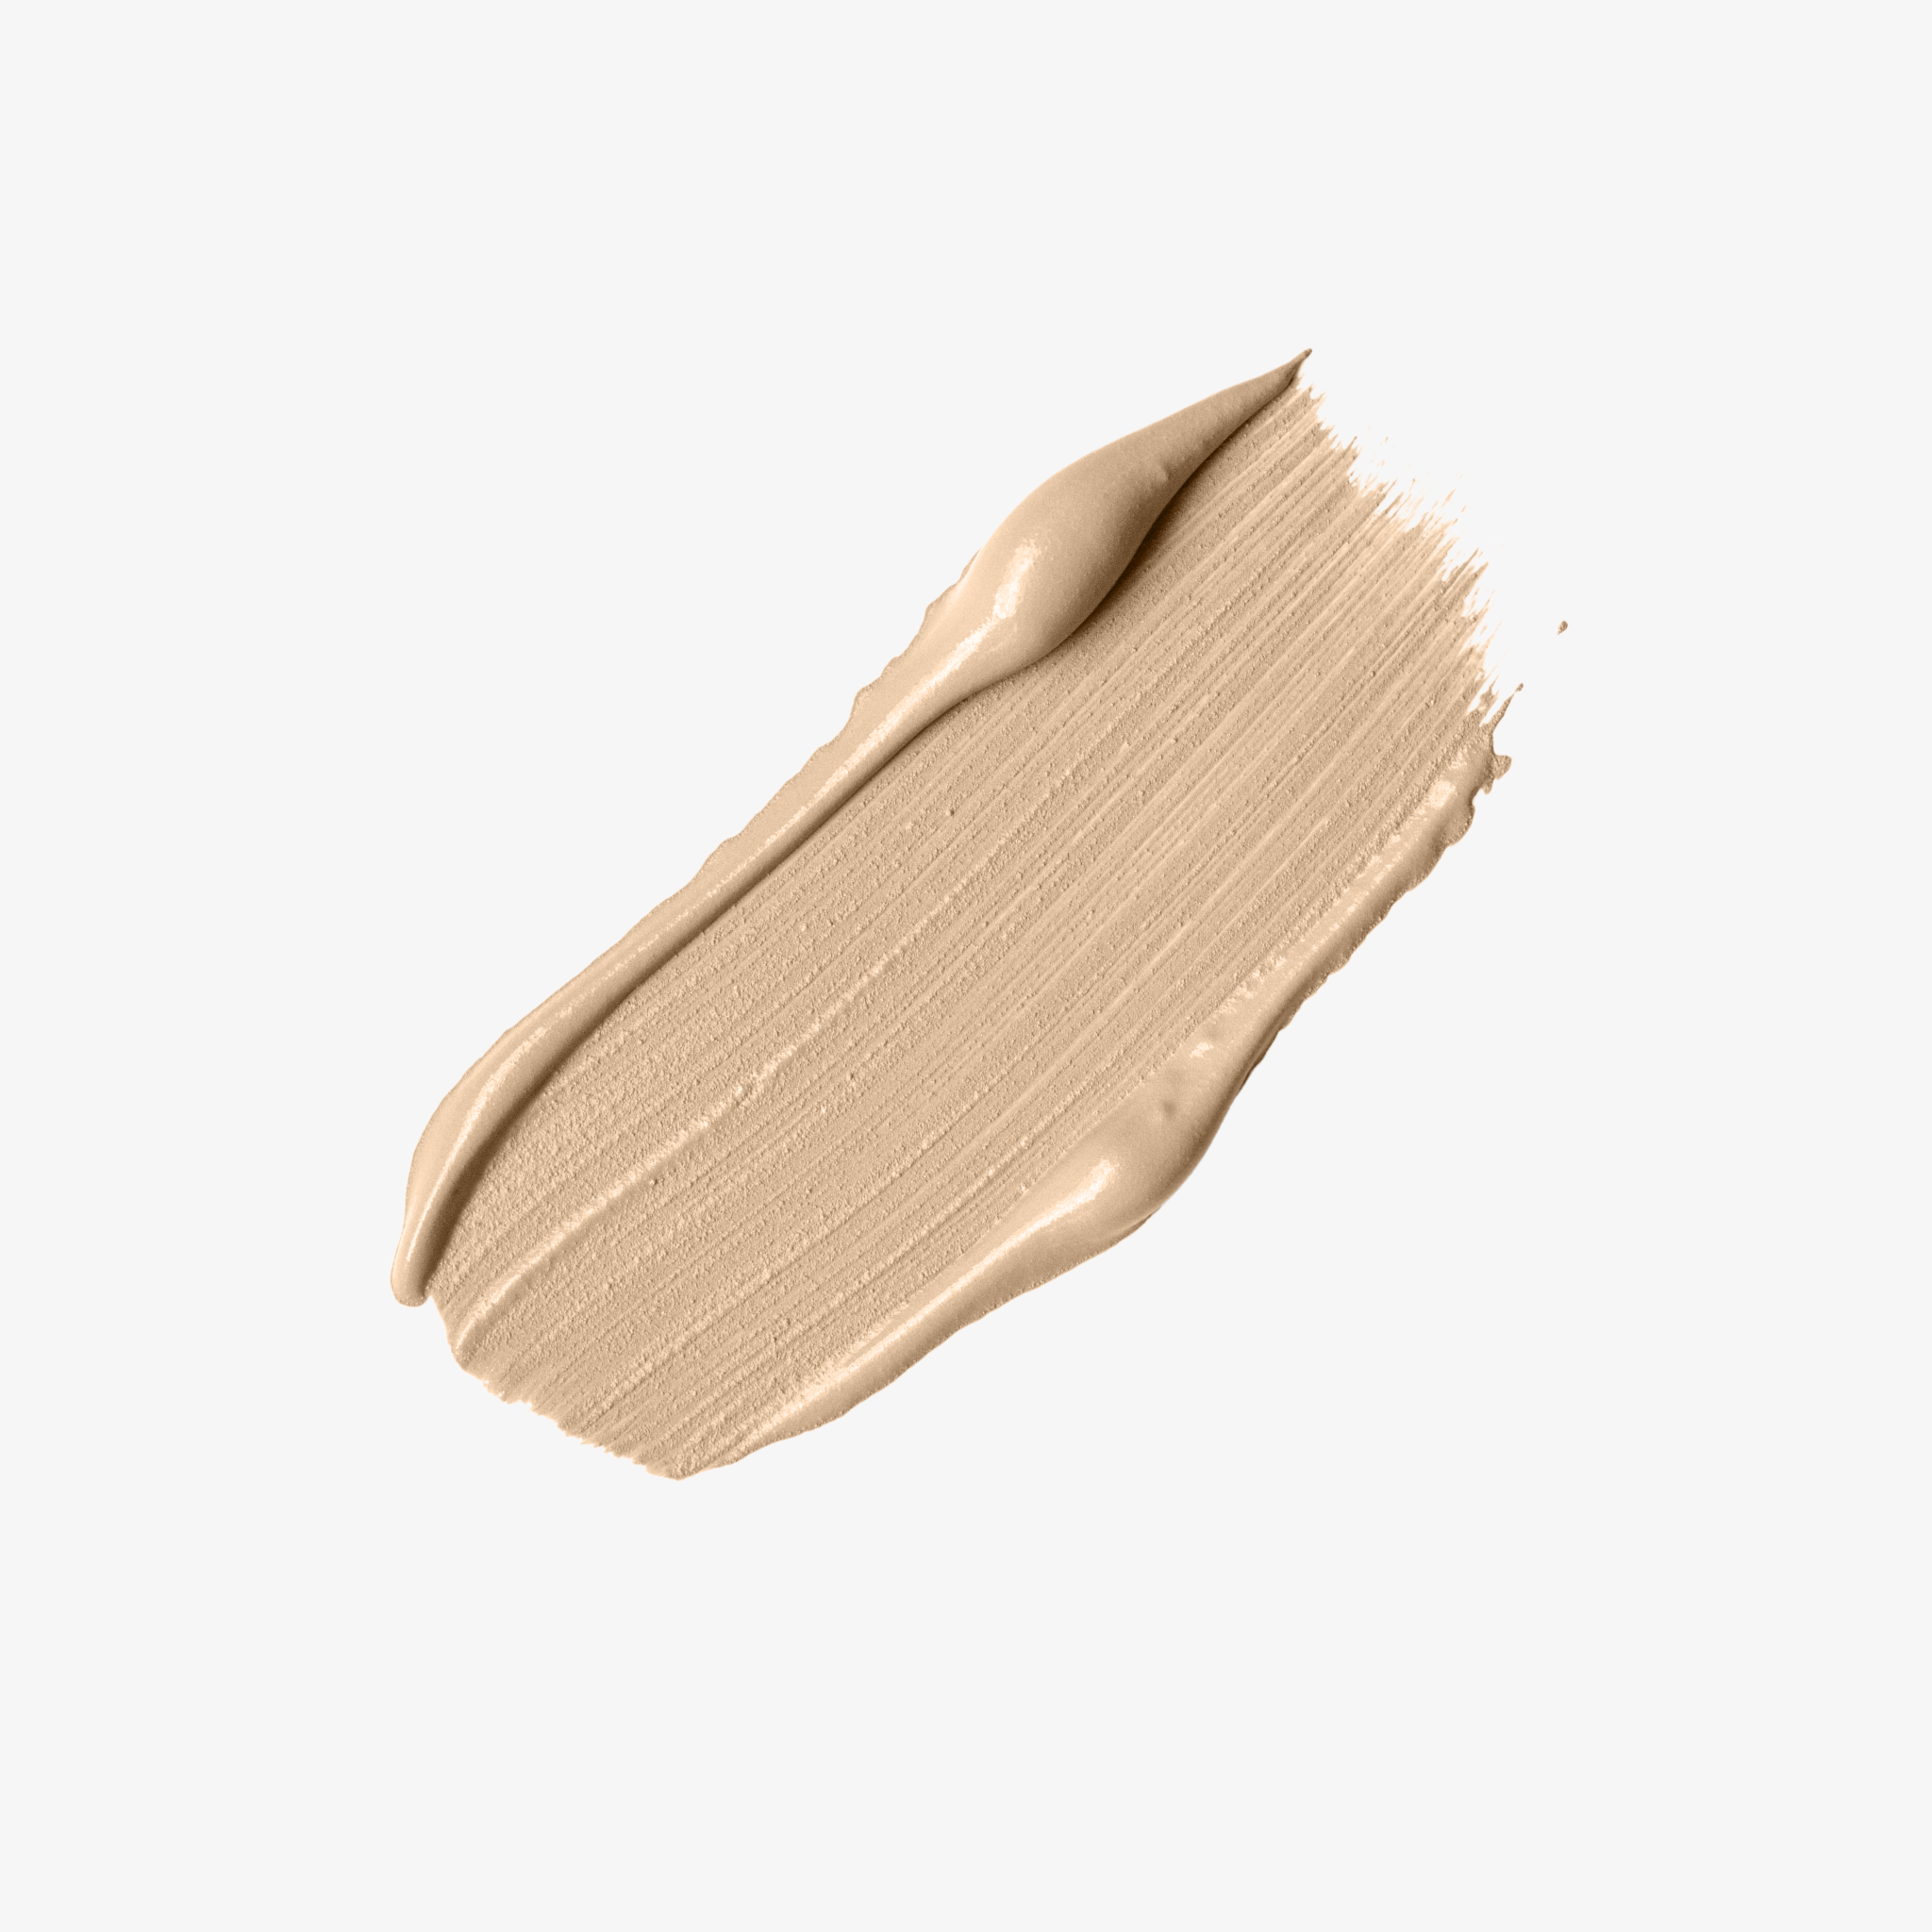 Instantly conceal the appearance of darkness and imperfections with one swipe. Advanced formula provides a supple, comfortable finish for a more unified skin tone that lasts 8 hours. FREE OF Cruelty-Free, Vegan-Friendly, E.U. Registered, and Made in the USA. Formulated without Alcohol, Barley, Corn, Oats, Rye, Soy, Spelt or Wheat. Free Of Parabens, Gluten, Phthalates, Oil, Fragrance, Sulfates, and GMO.